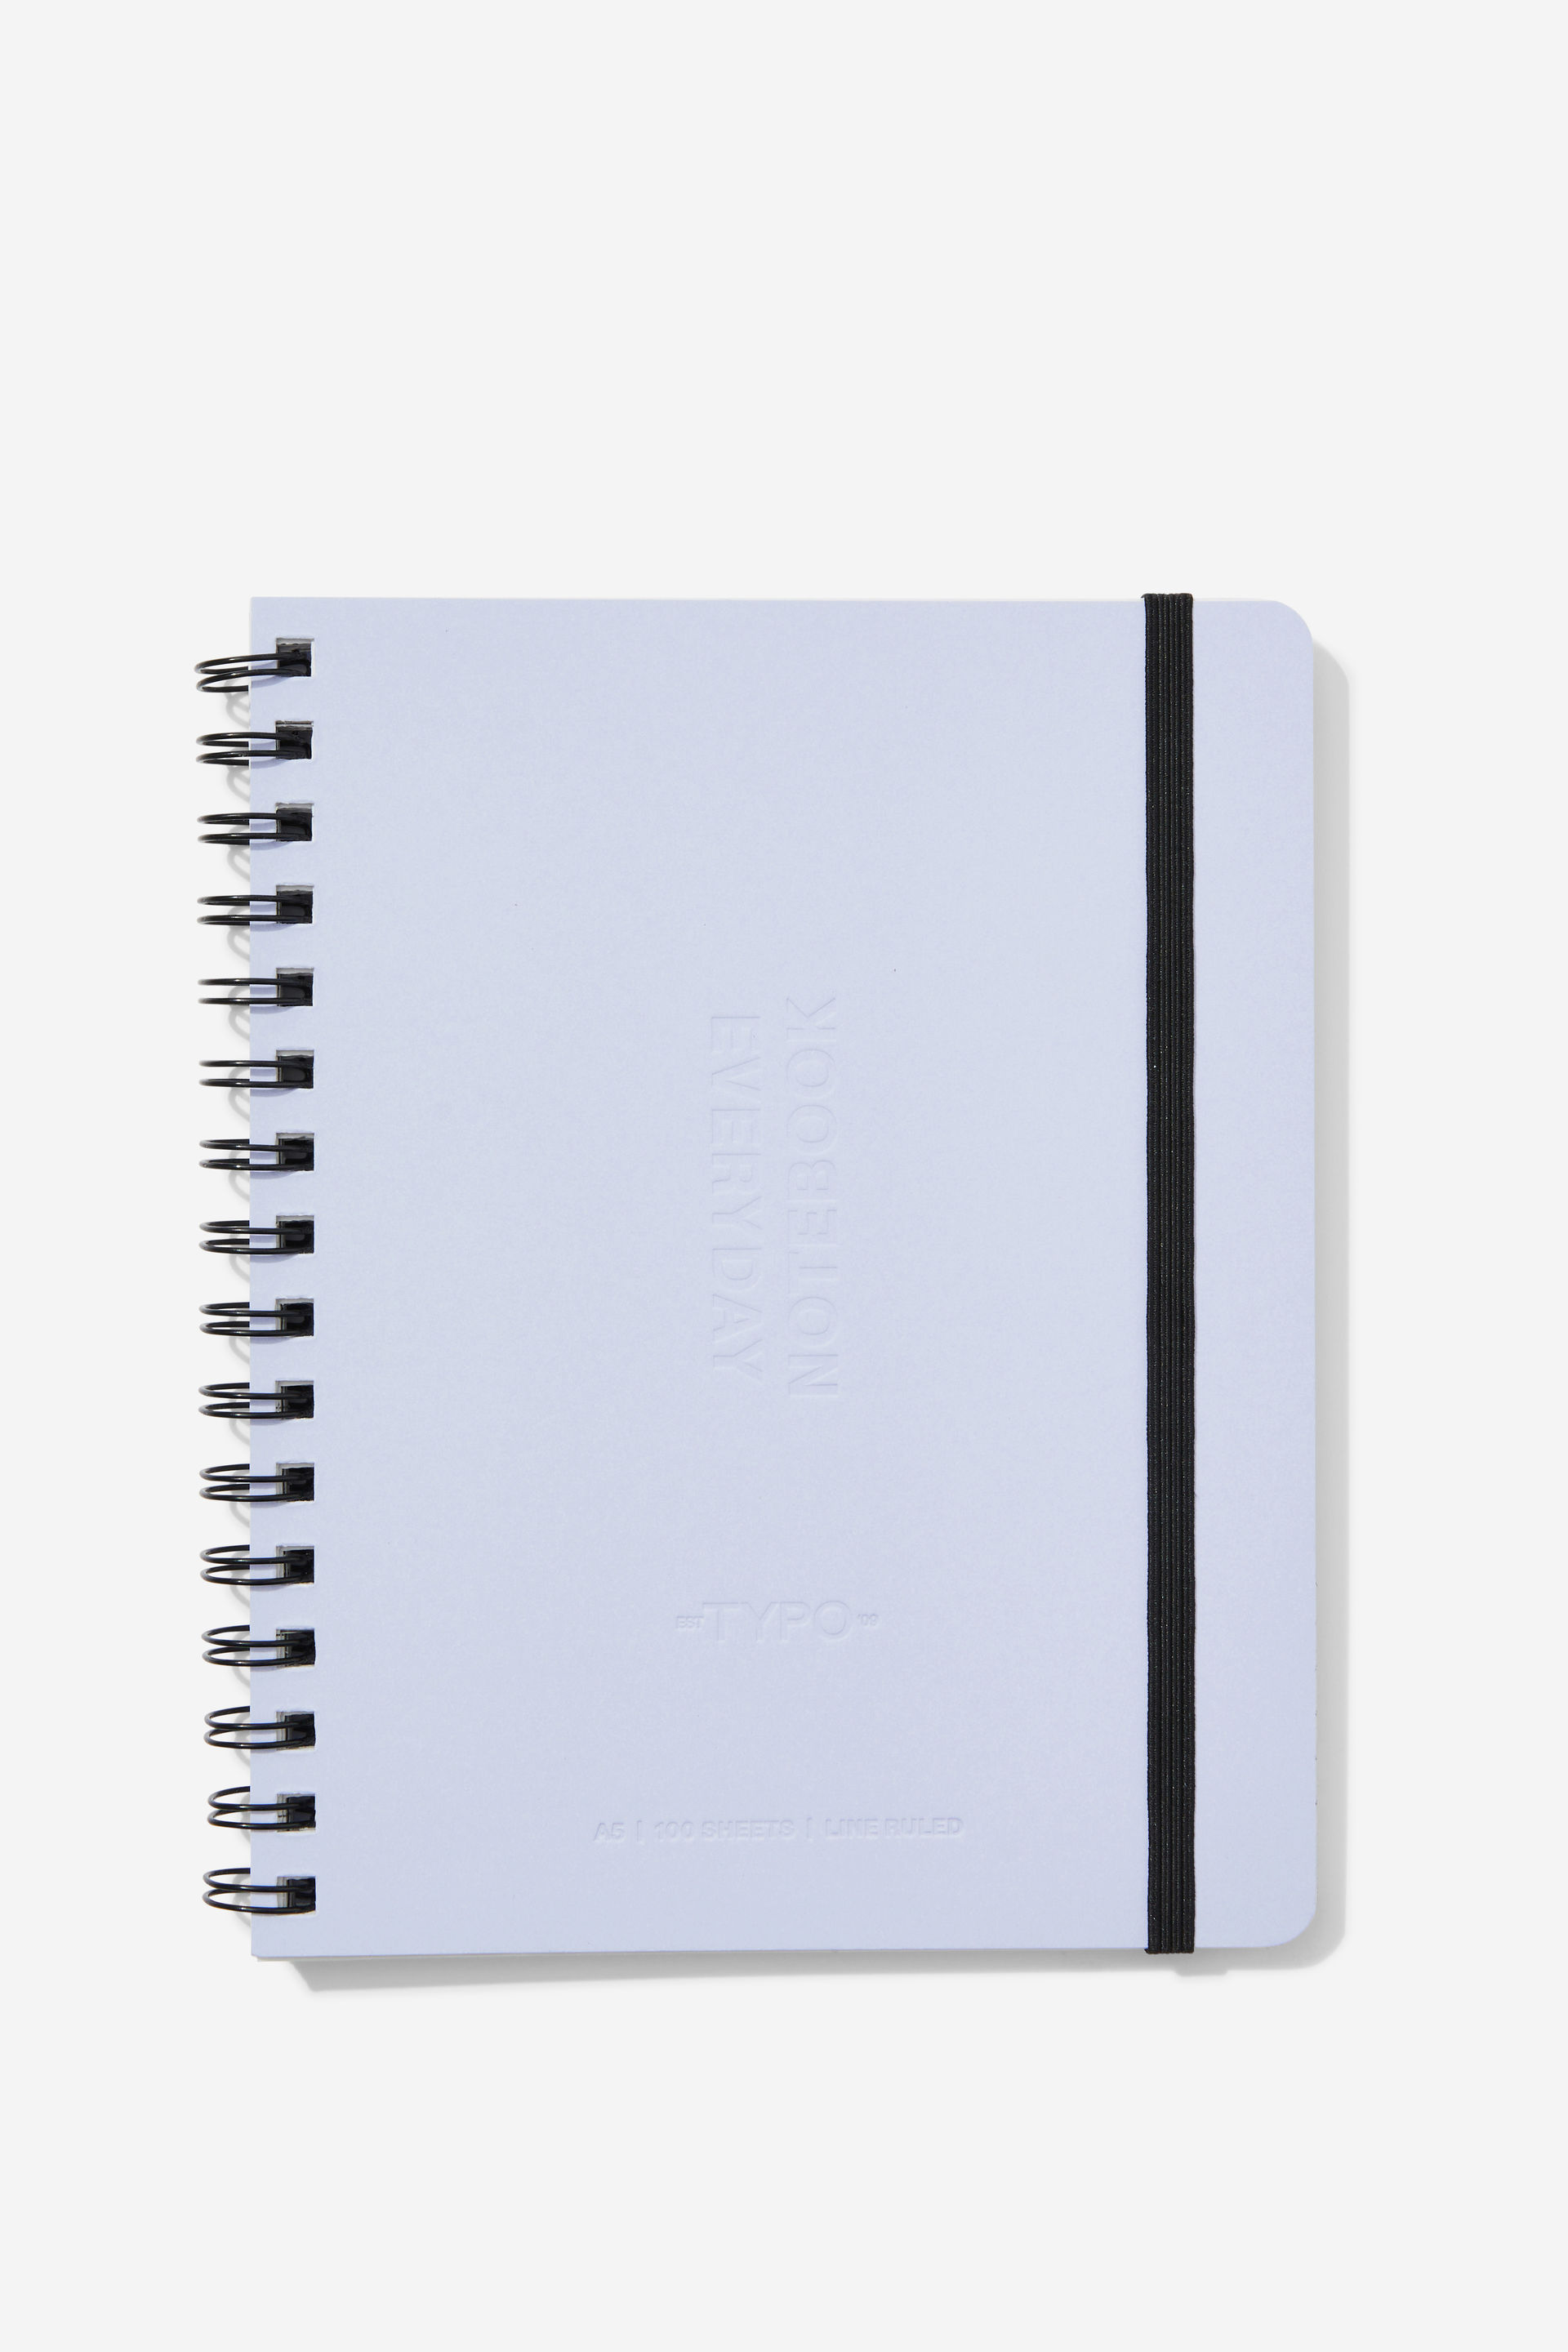 Typo - A5 Everyday Notebook - Soft lilac debossed